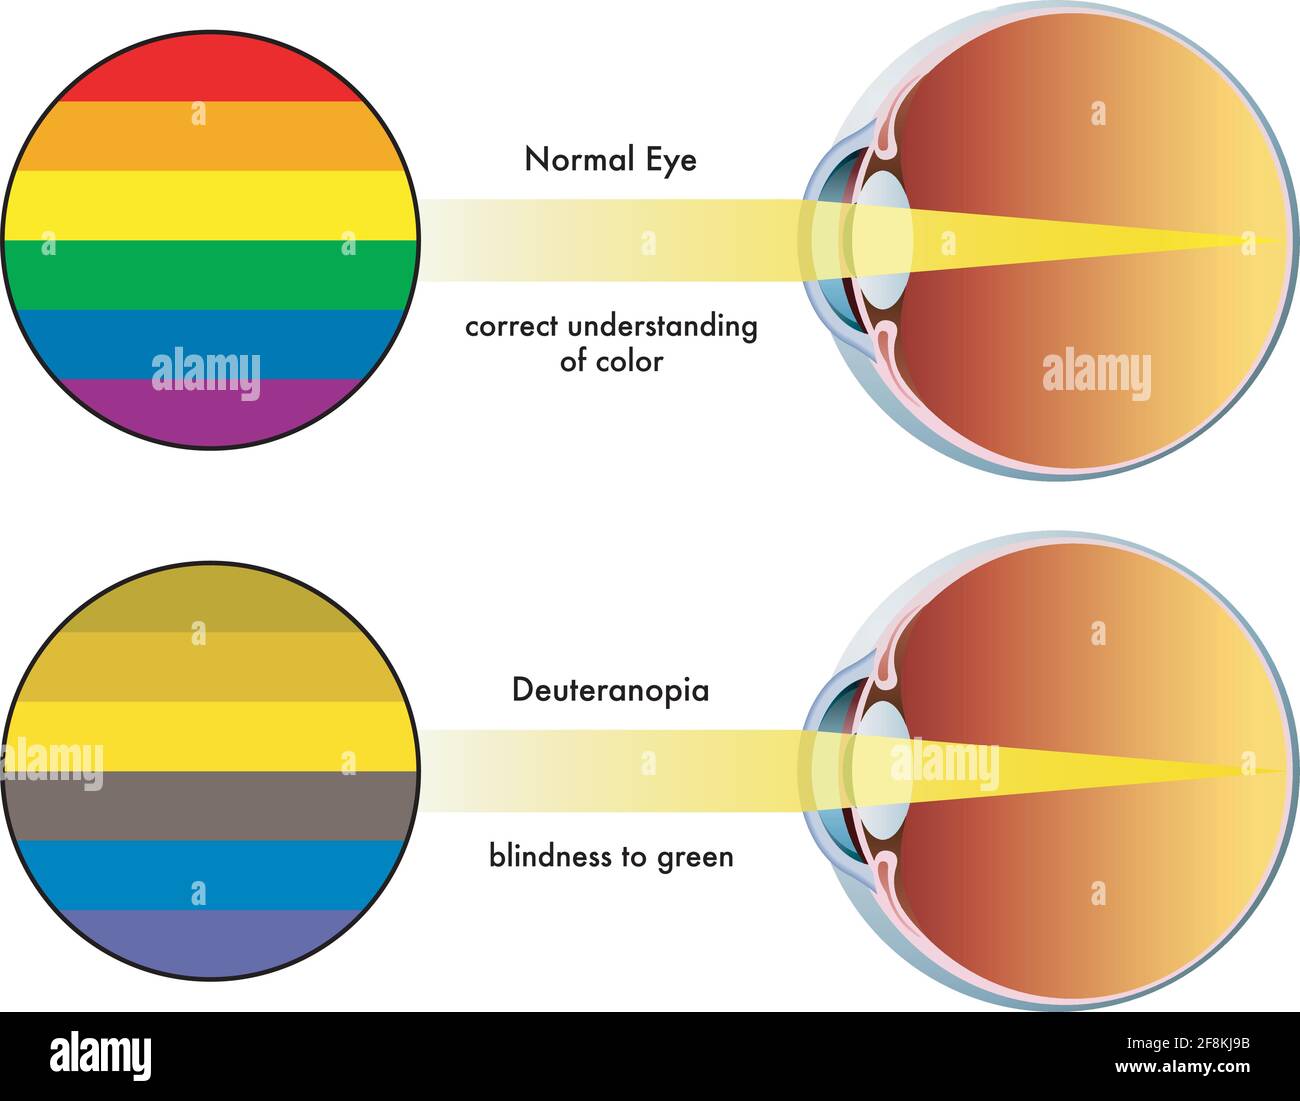 Medical illustration shows how colors are perceived by a healthy eye, and by one affected by deuteranopia. Stock Vector